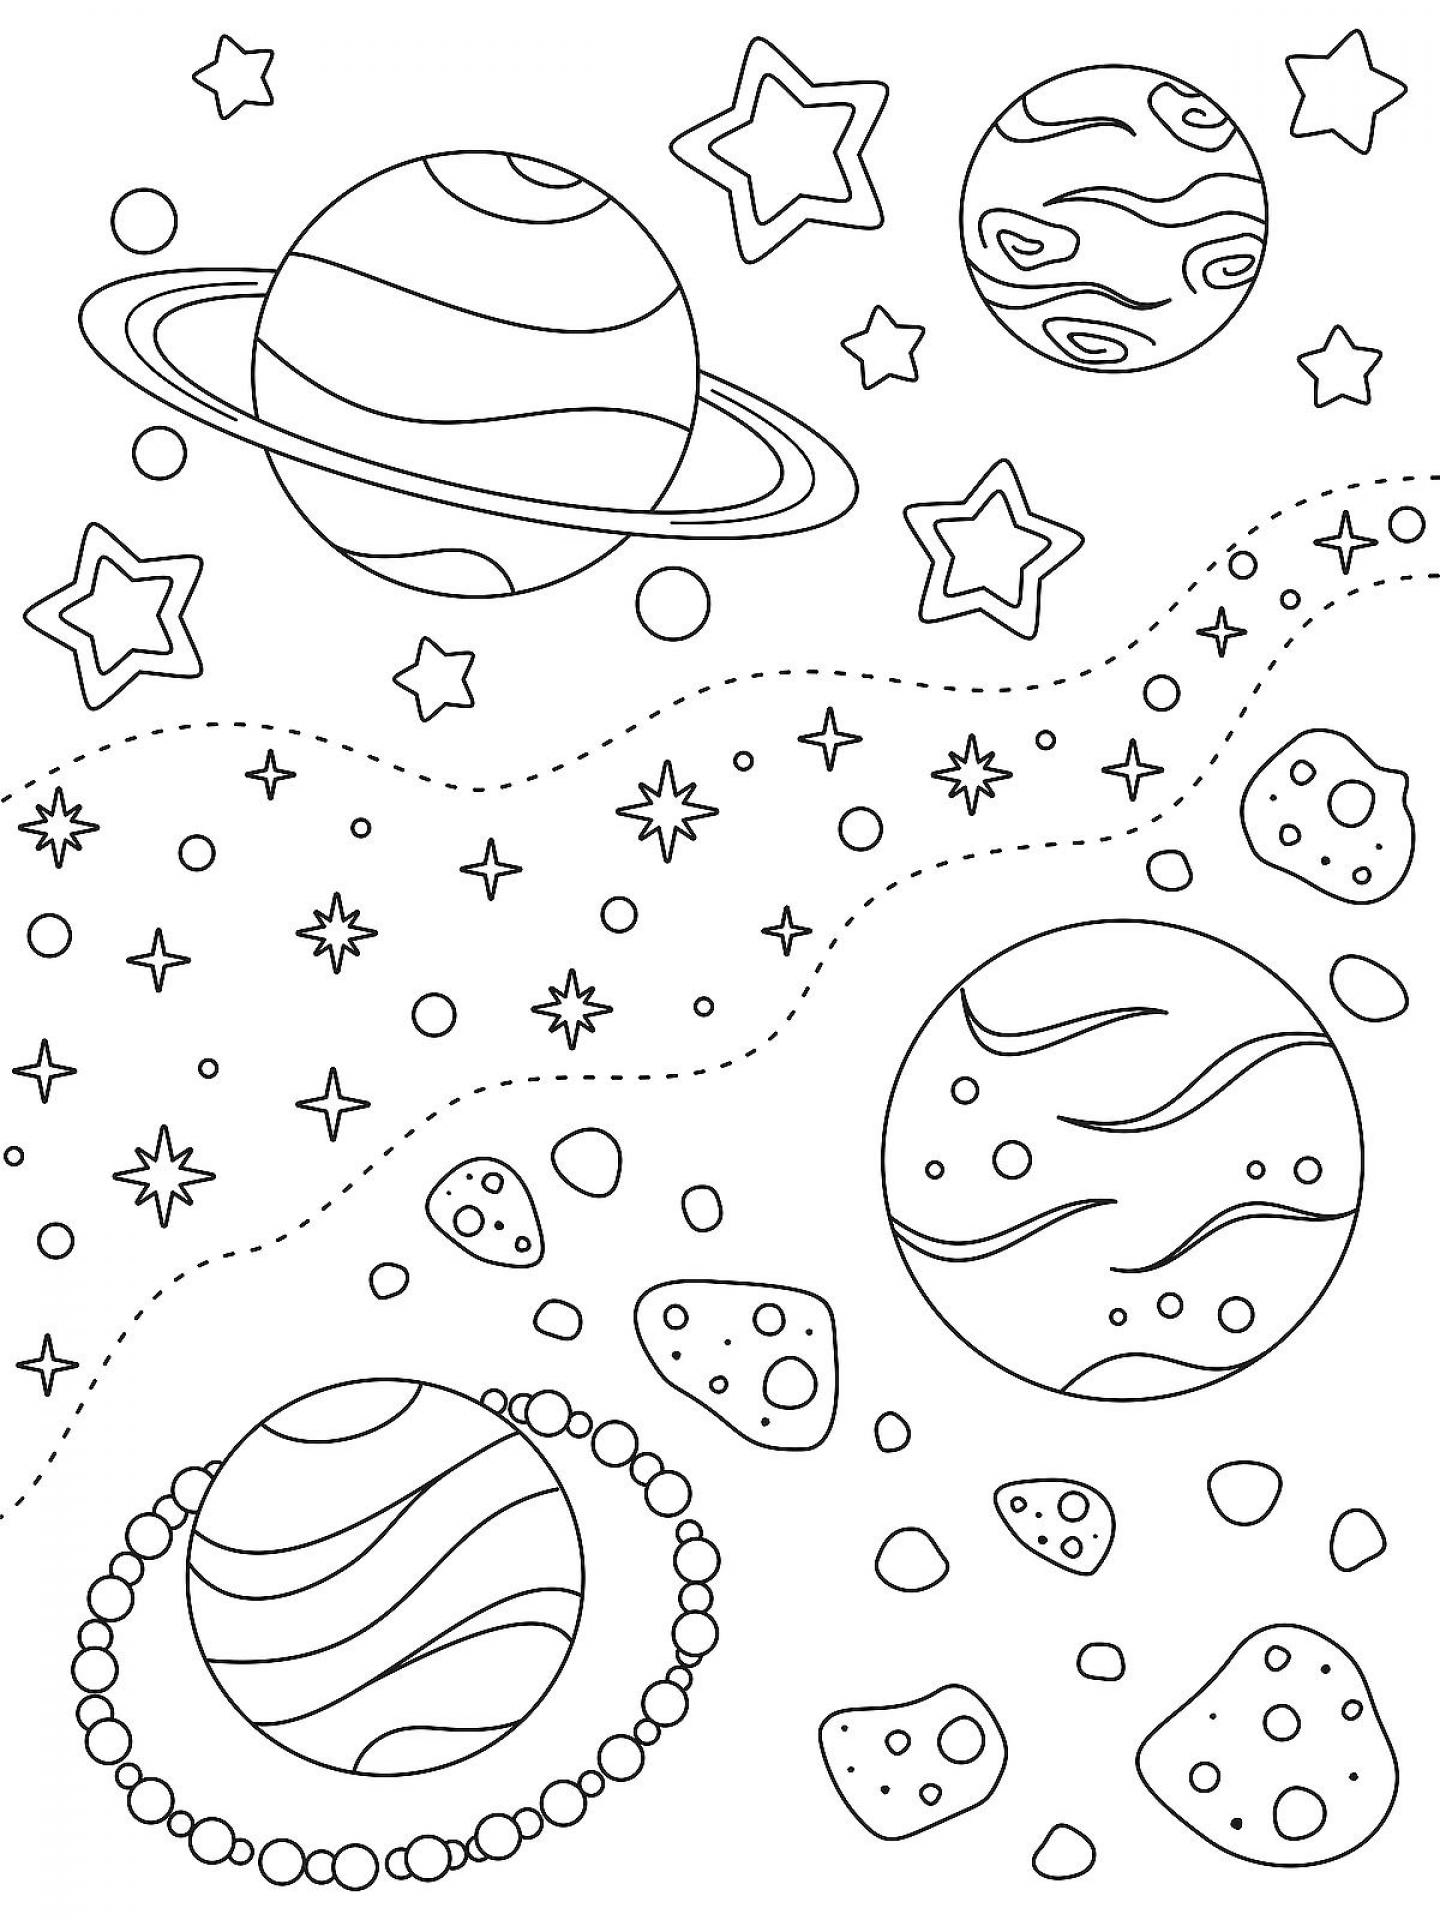 Outer Space Coloring Pages for Kids: Free Printable - SheetalColor.com